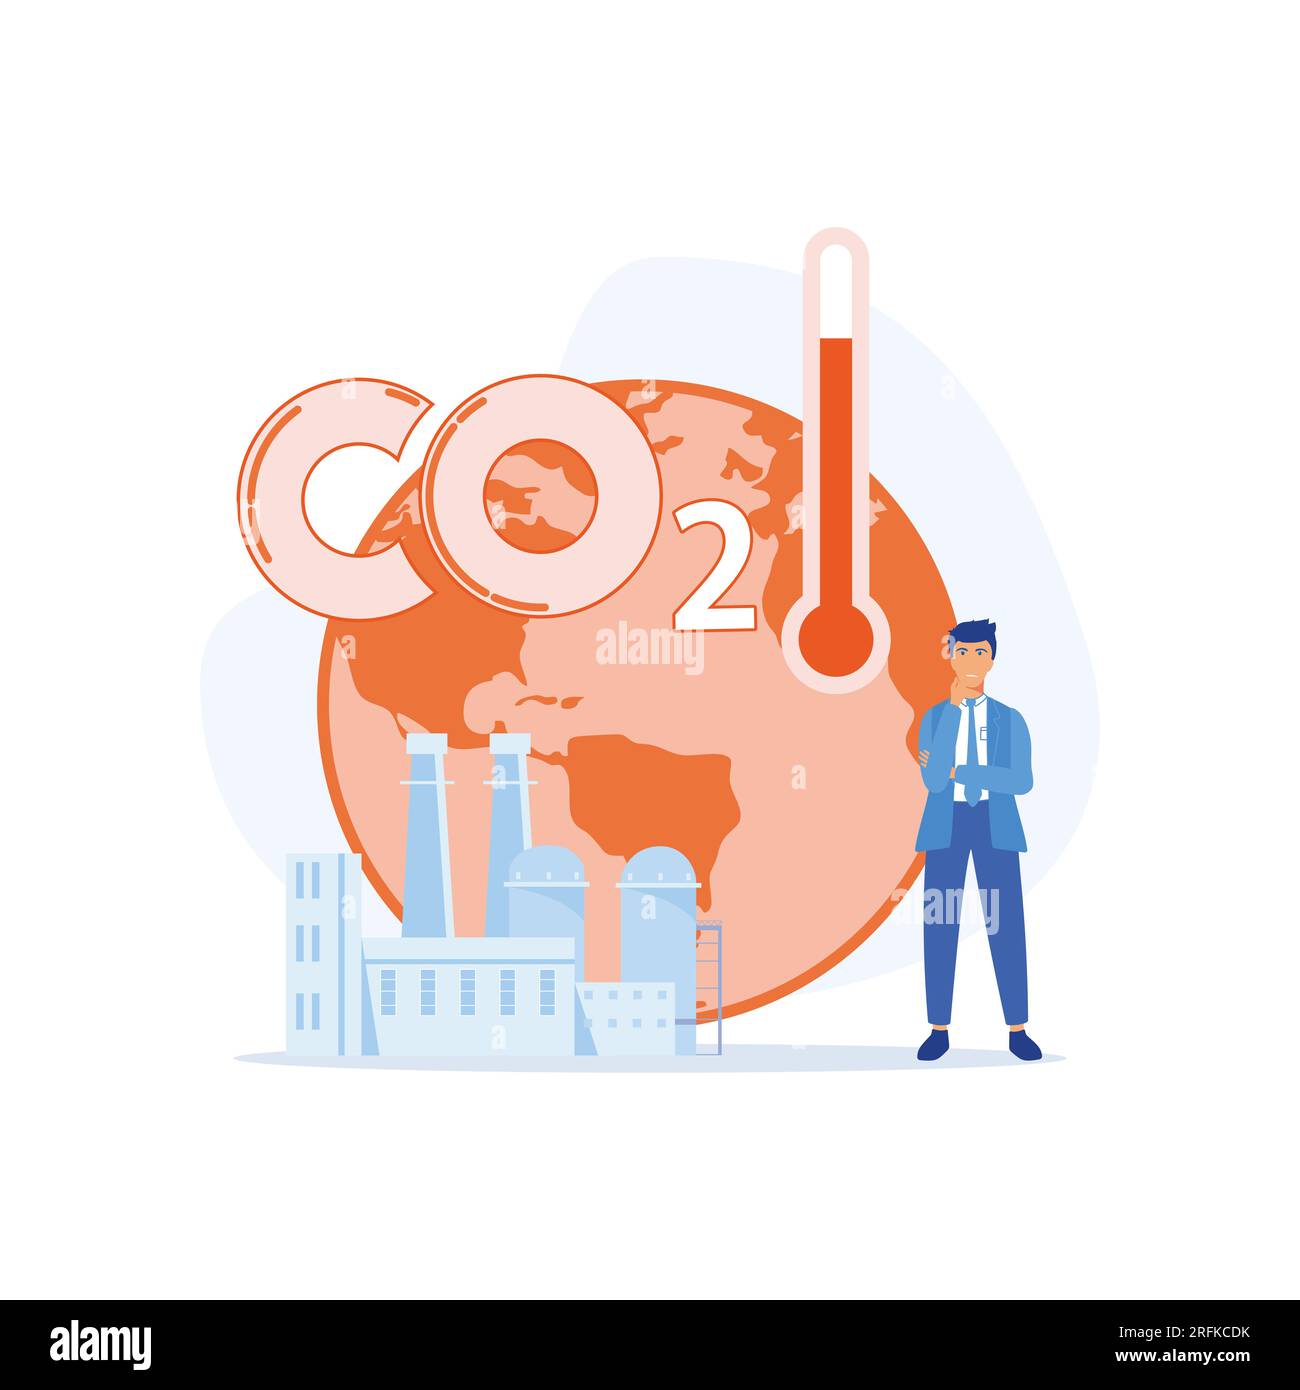 Circular economy, Sustainable economic growth, green energy and reduce co2 emission and climate impact, flat vector modern illustration Stock Vector